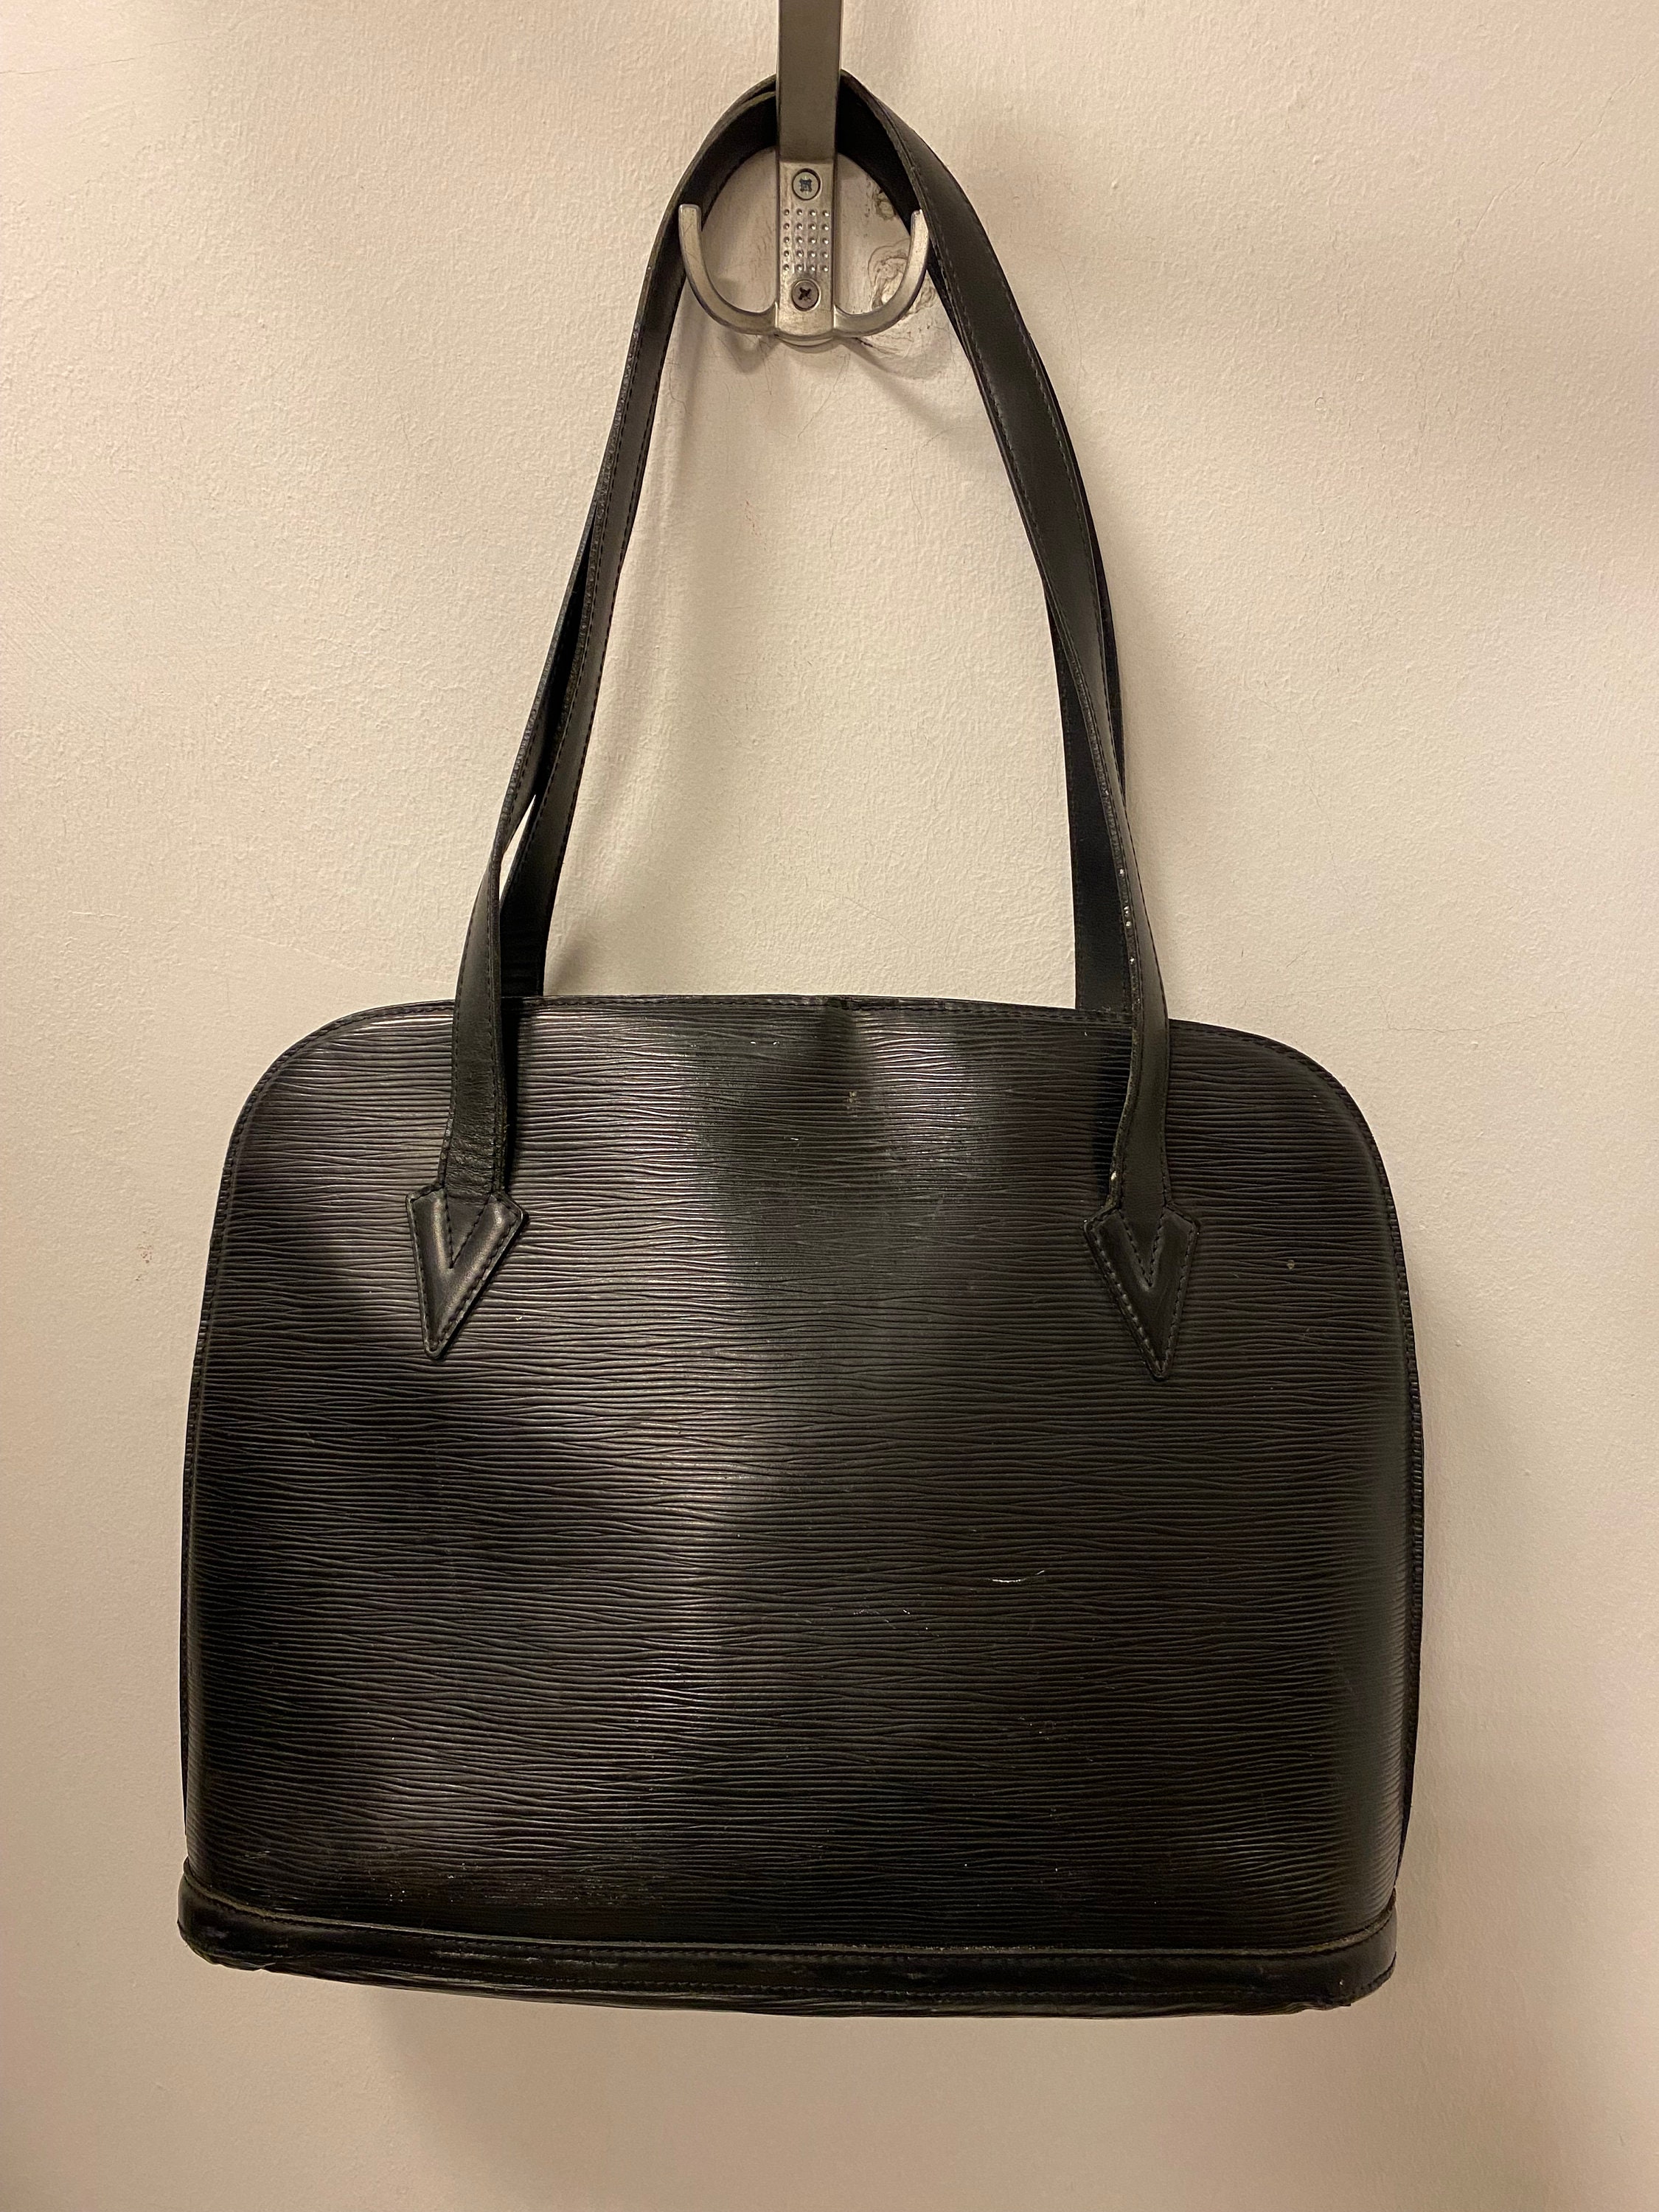 Louis Vuitton pre-owned Lussac tote bag